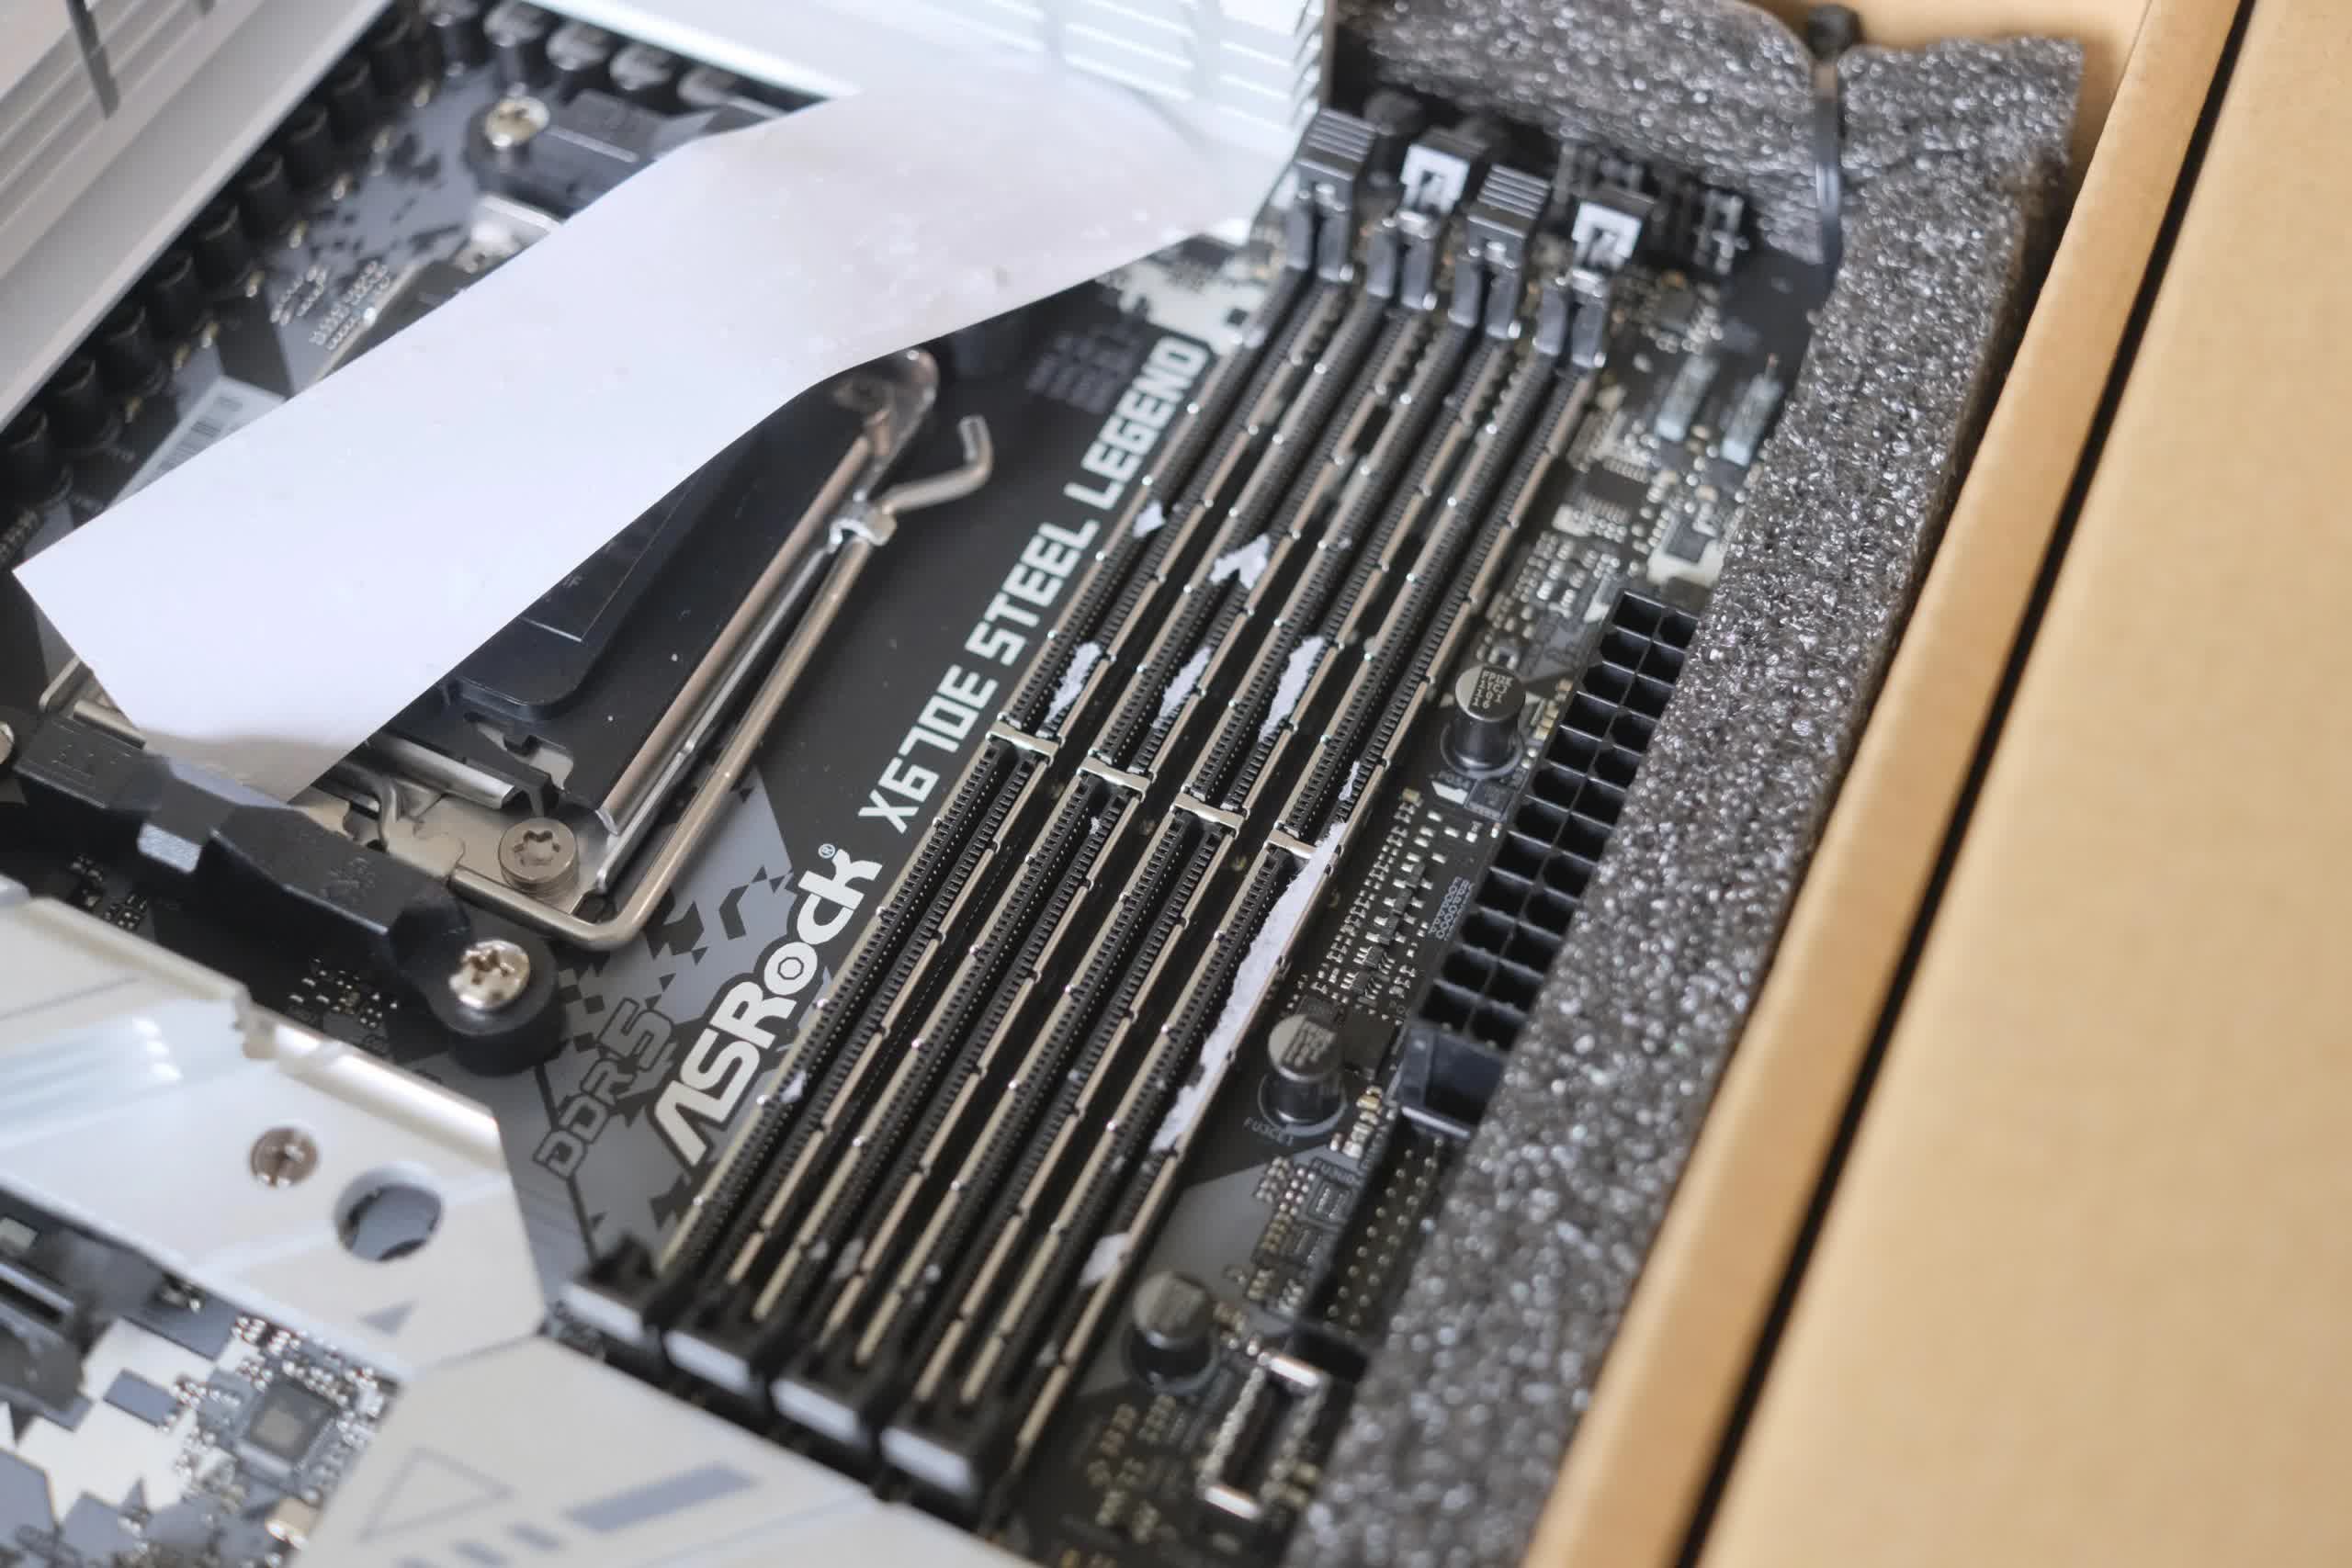 Asrock will send you a replacement motherboard if you can't get the stickers out of your DIMM sockets